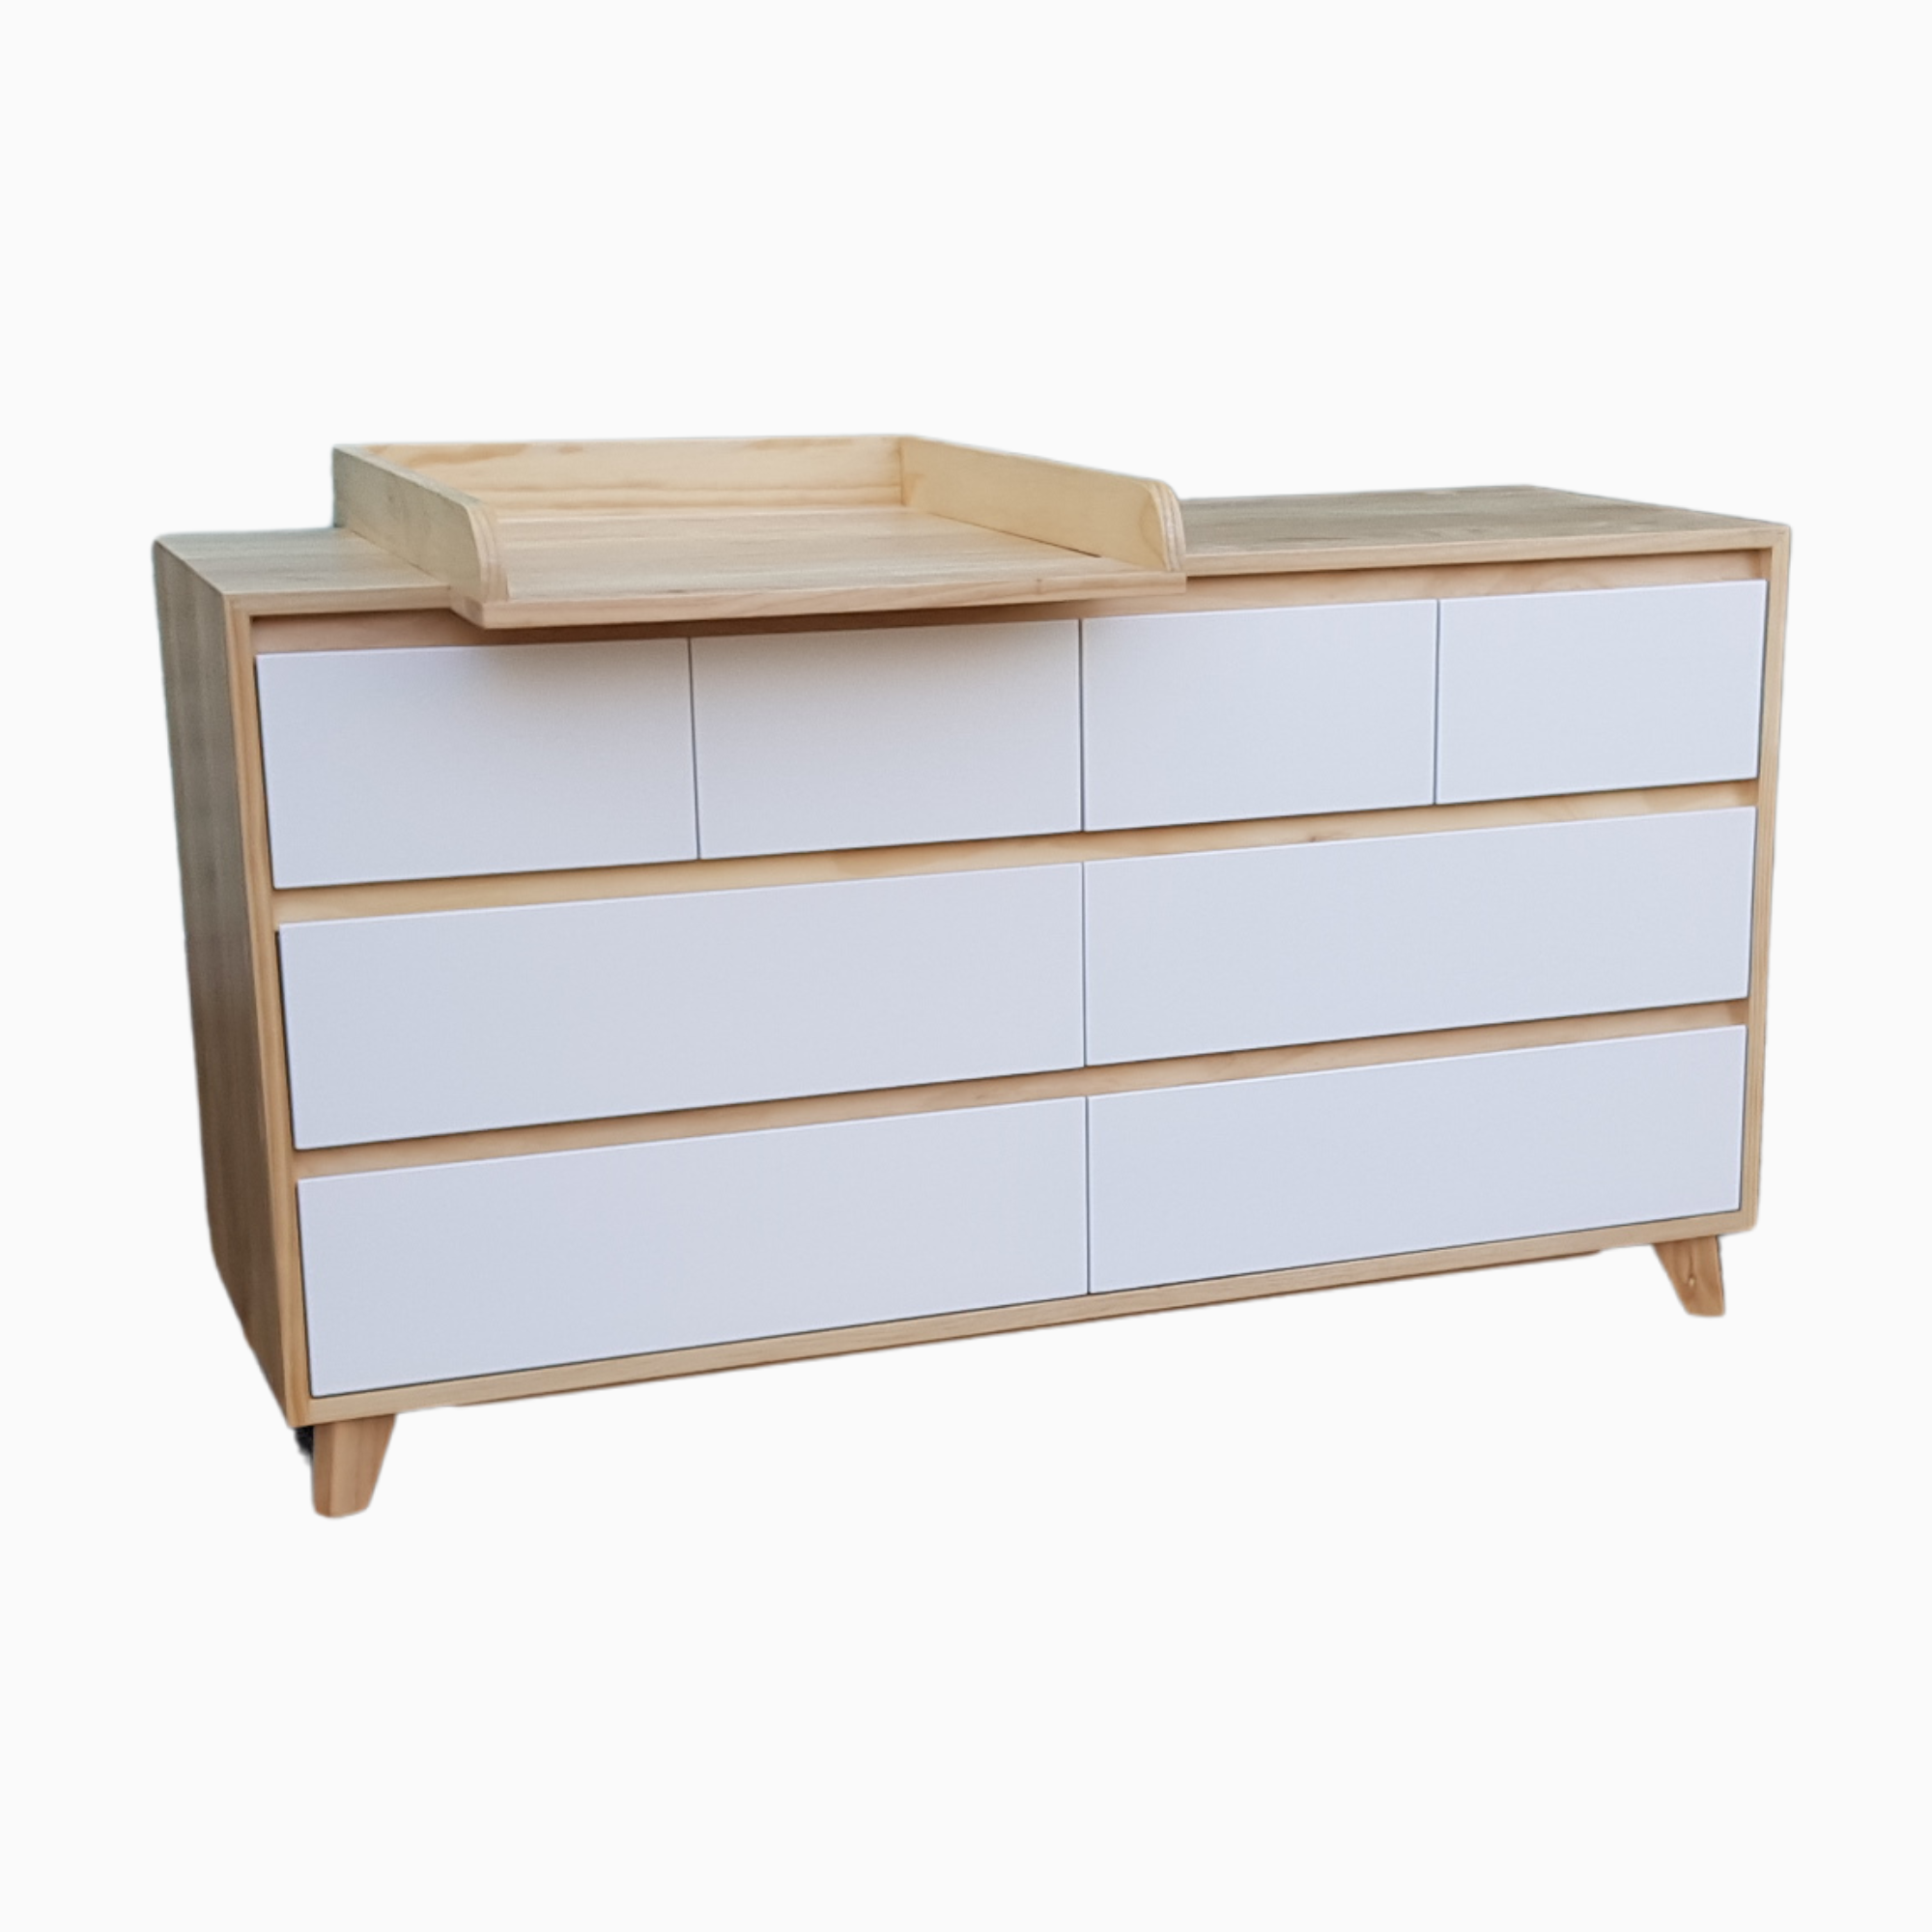 BRIMAR SOLID TIMBER LOWBOY WITH A DETACHABLE CHANGING TABLE | NZ MADE